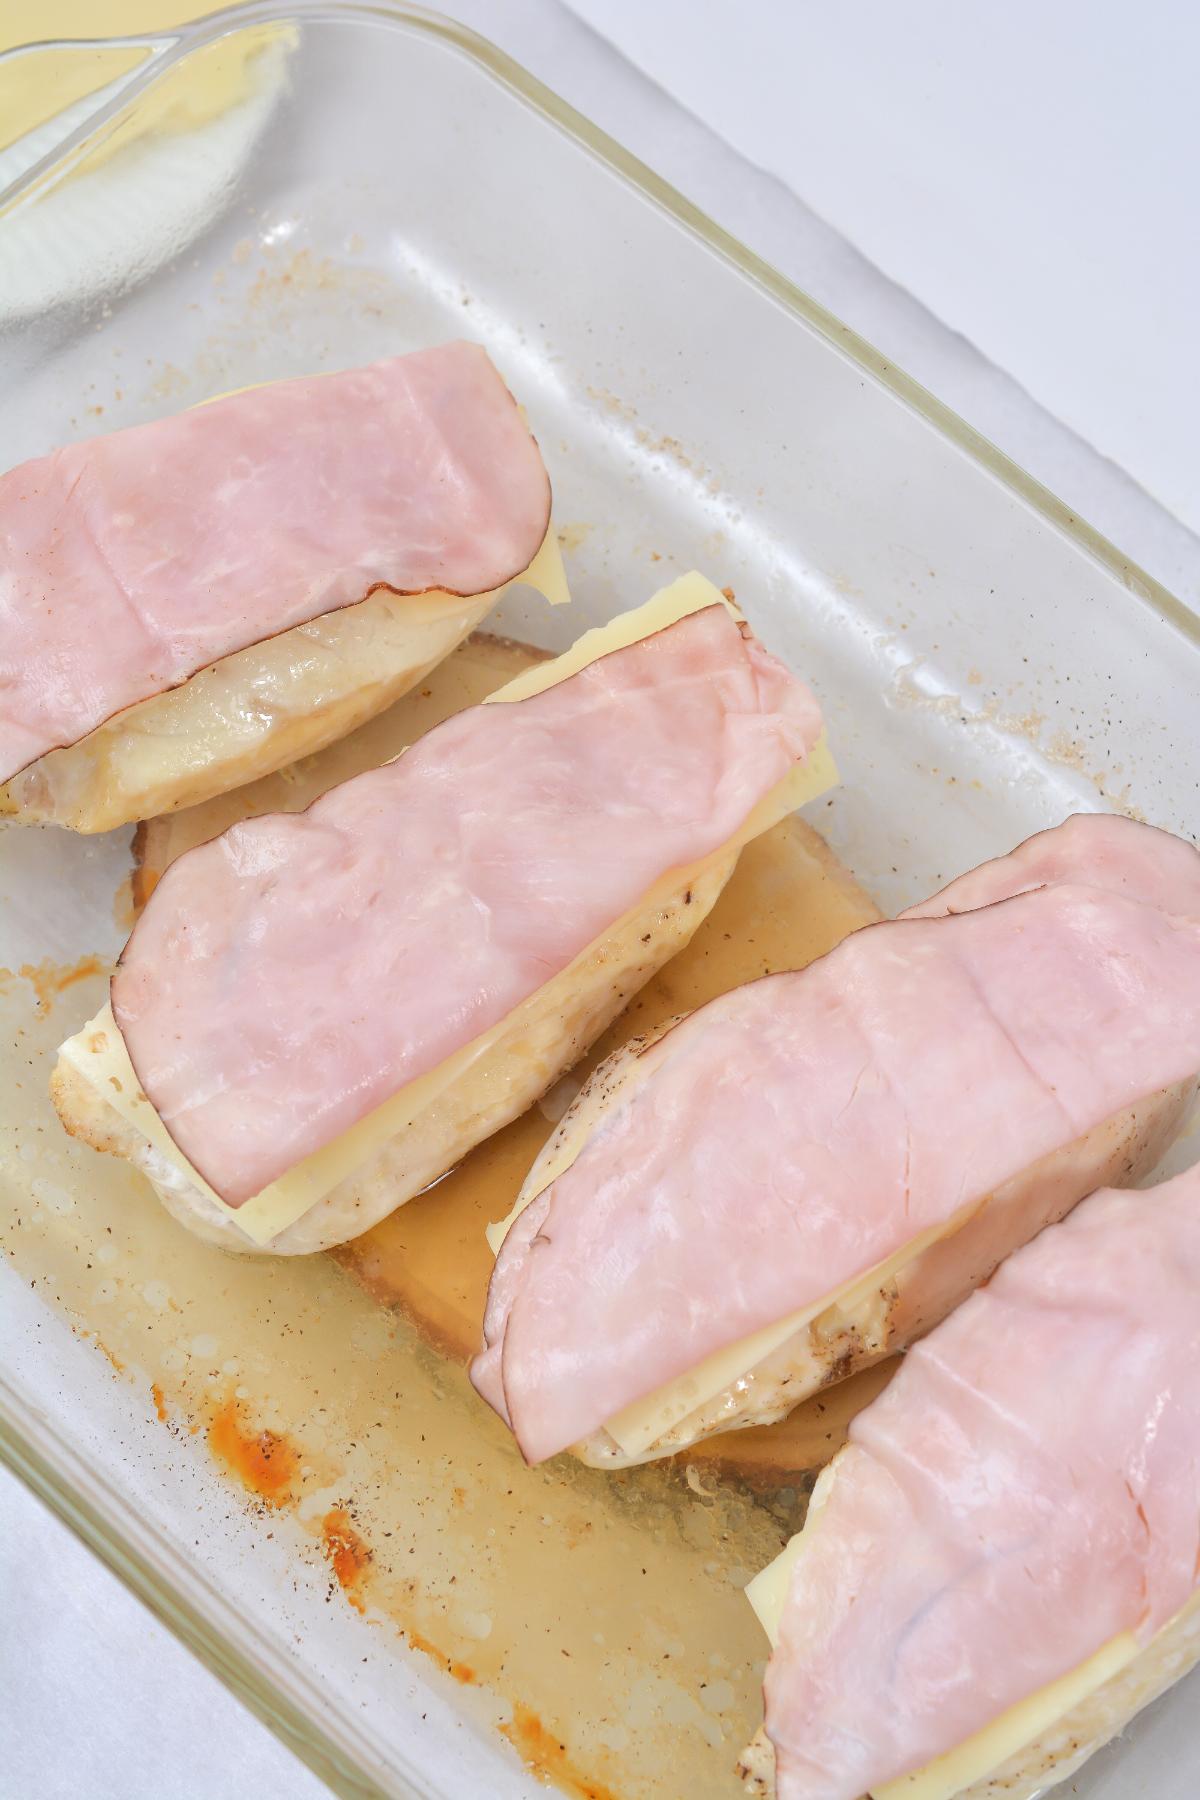 a Slice of Ham is added on top of the cheese and chicken breast.